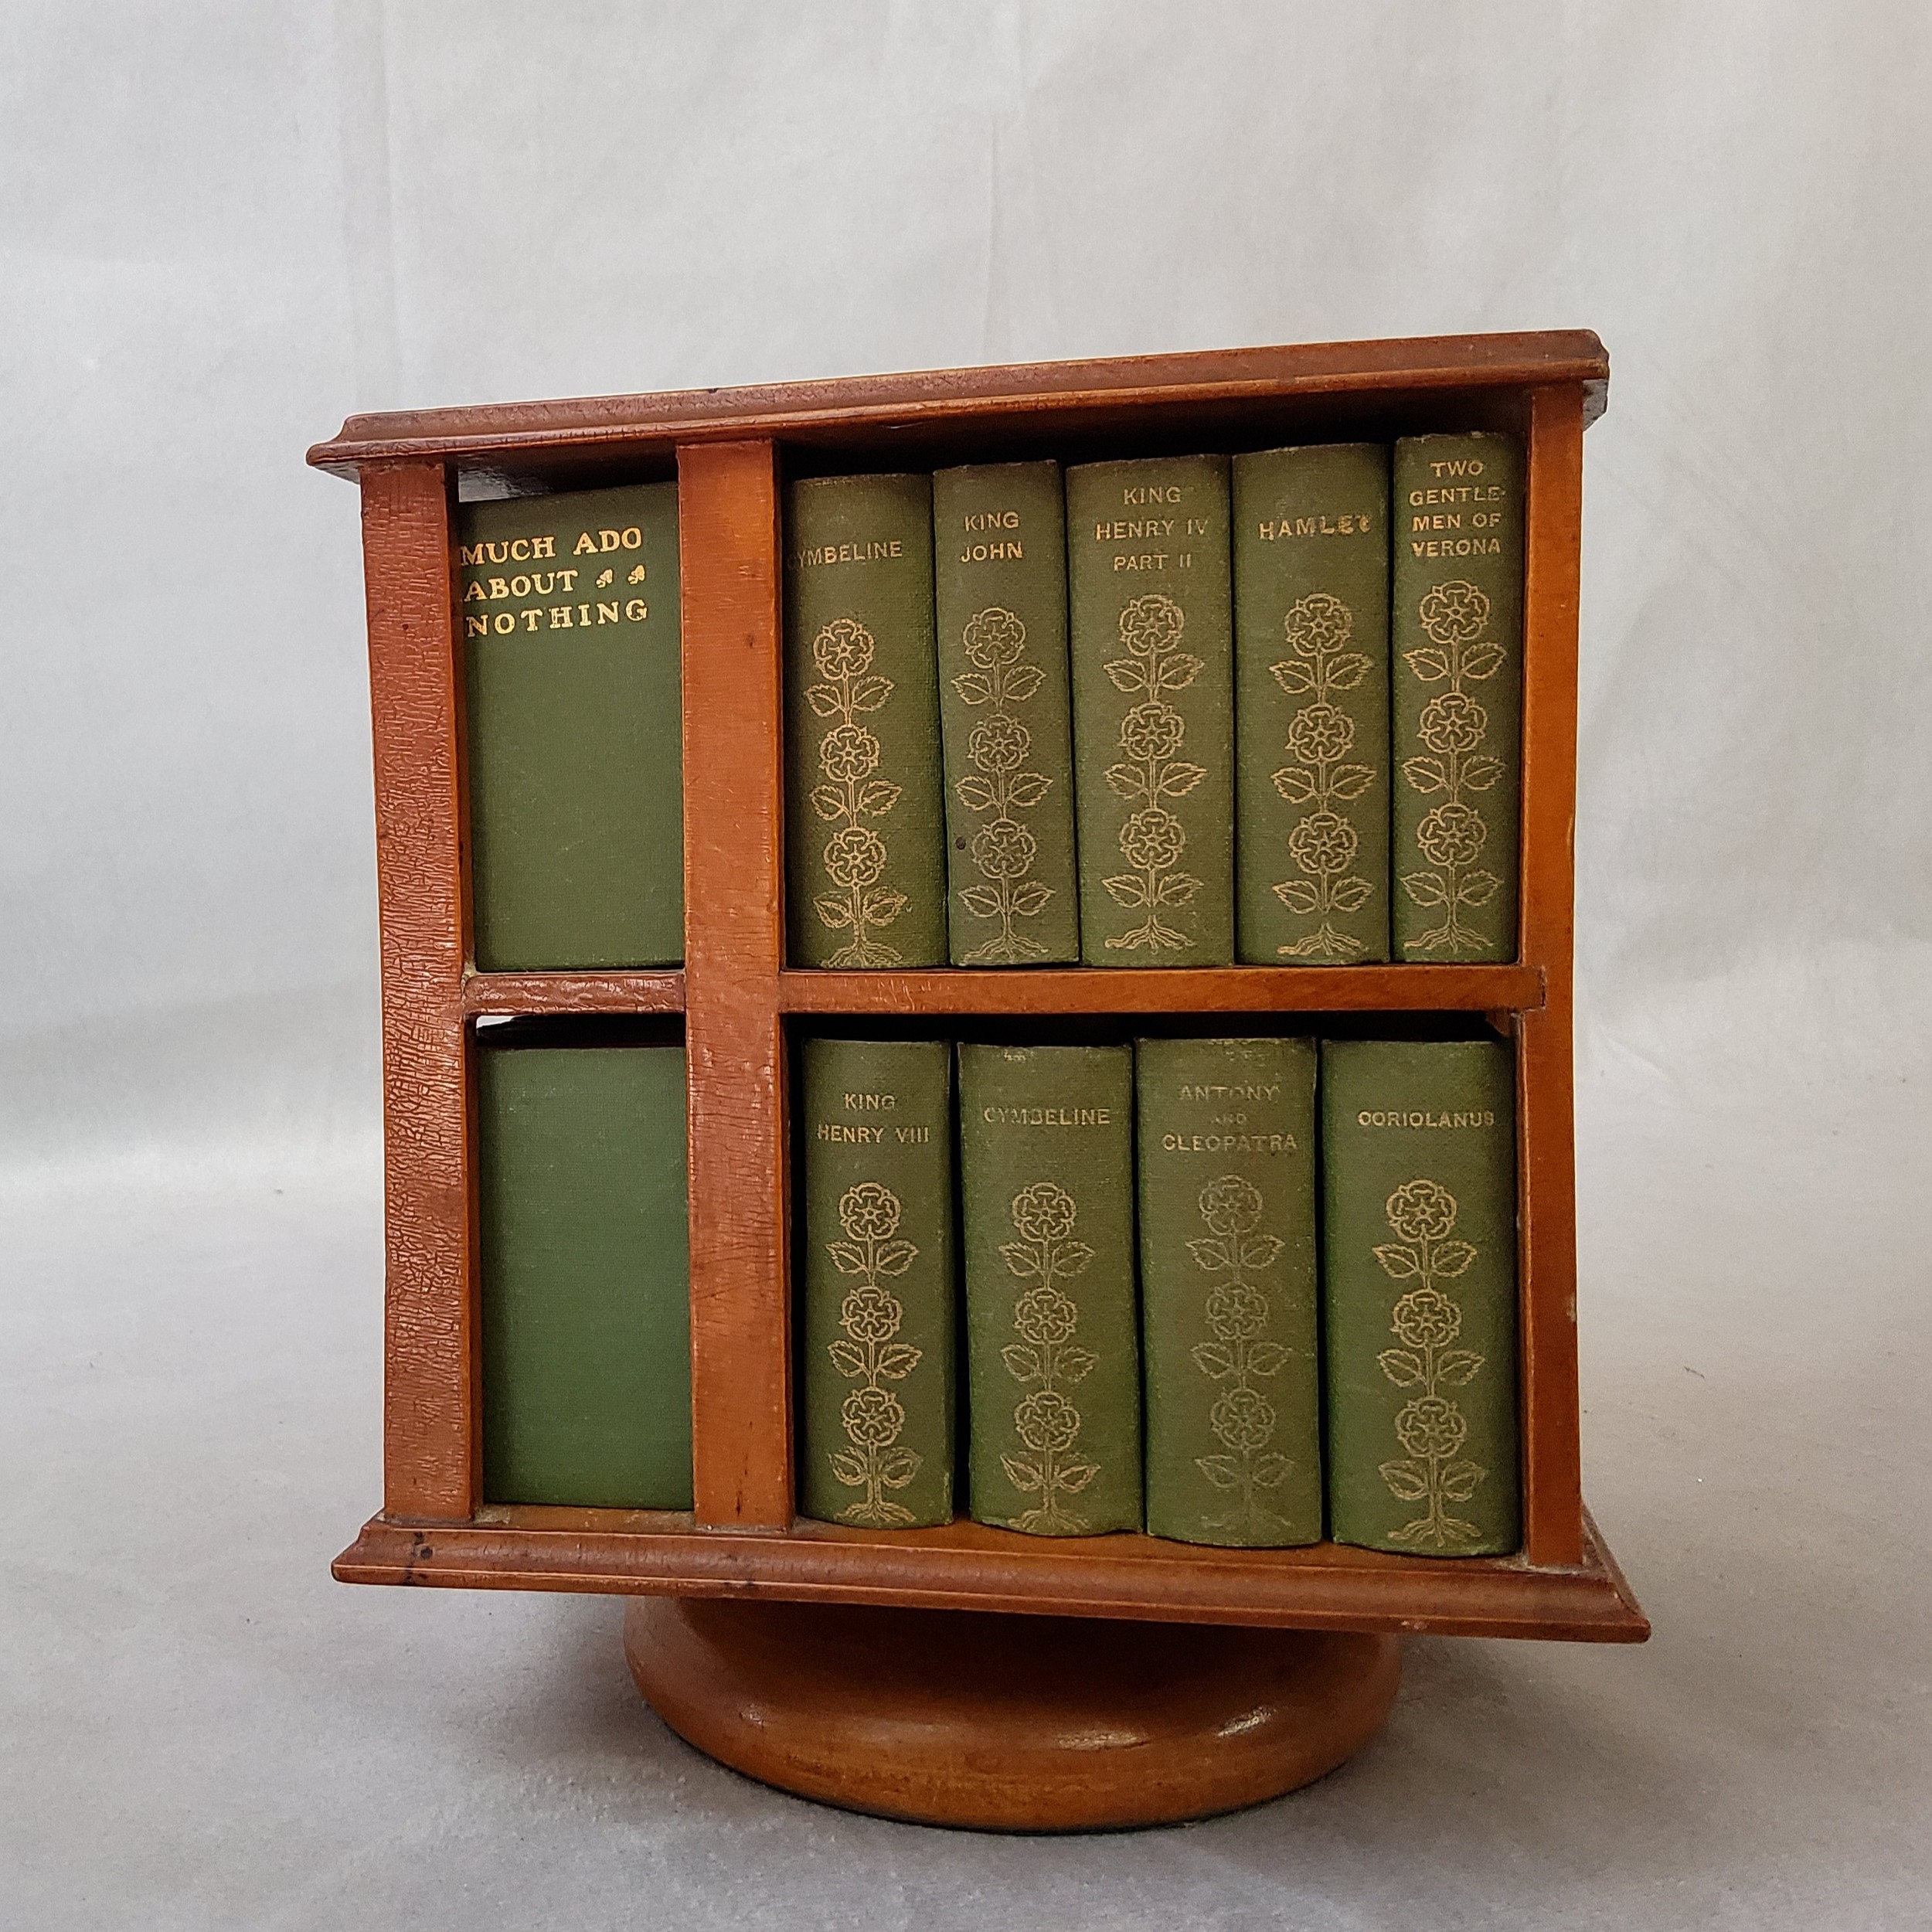 A 19th-century revolving miniature bookcase, containing miniature editions of the work of William - Image 6 of 6